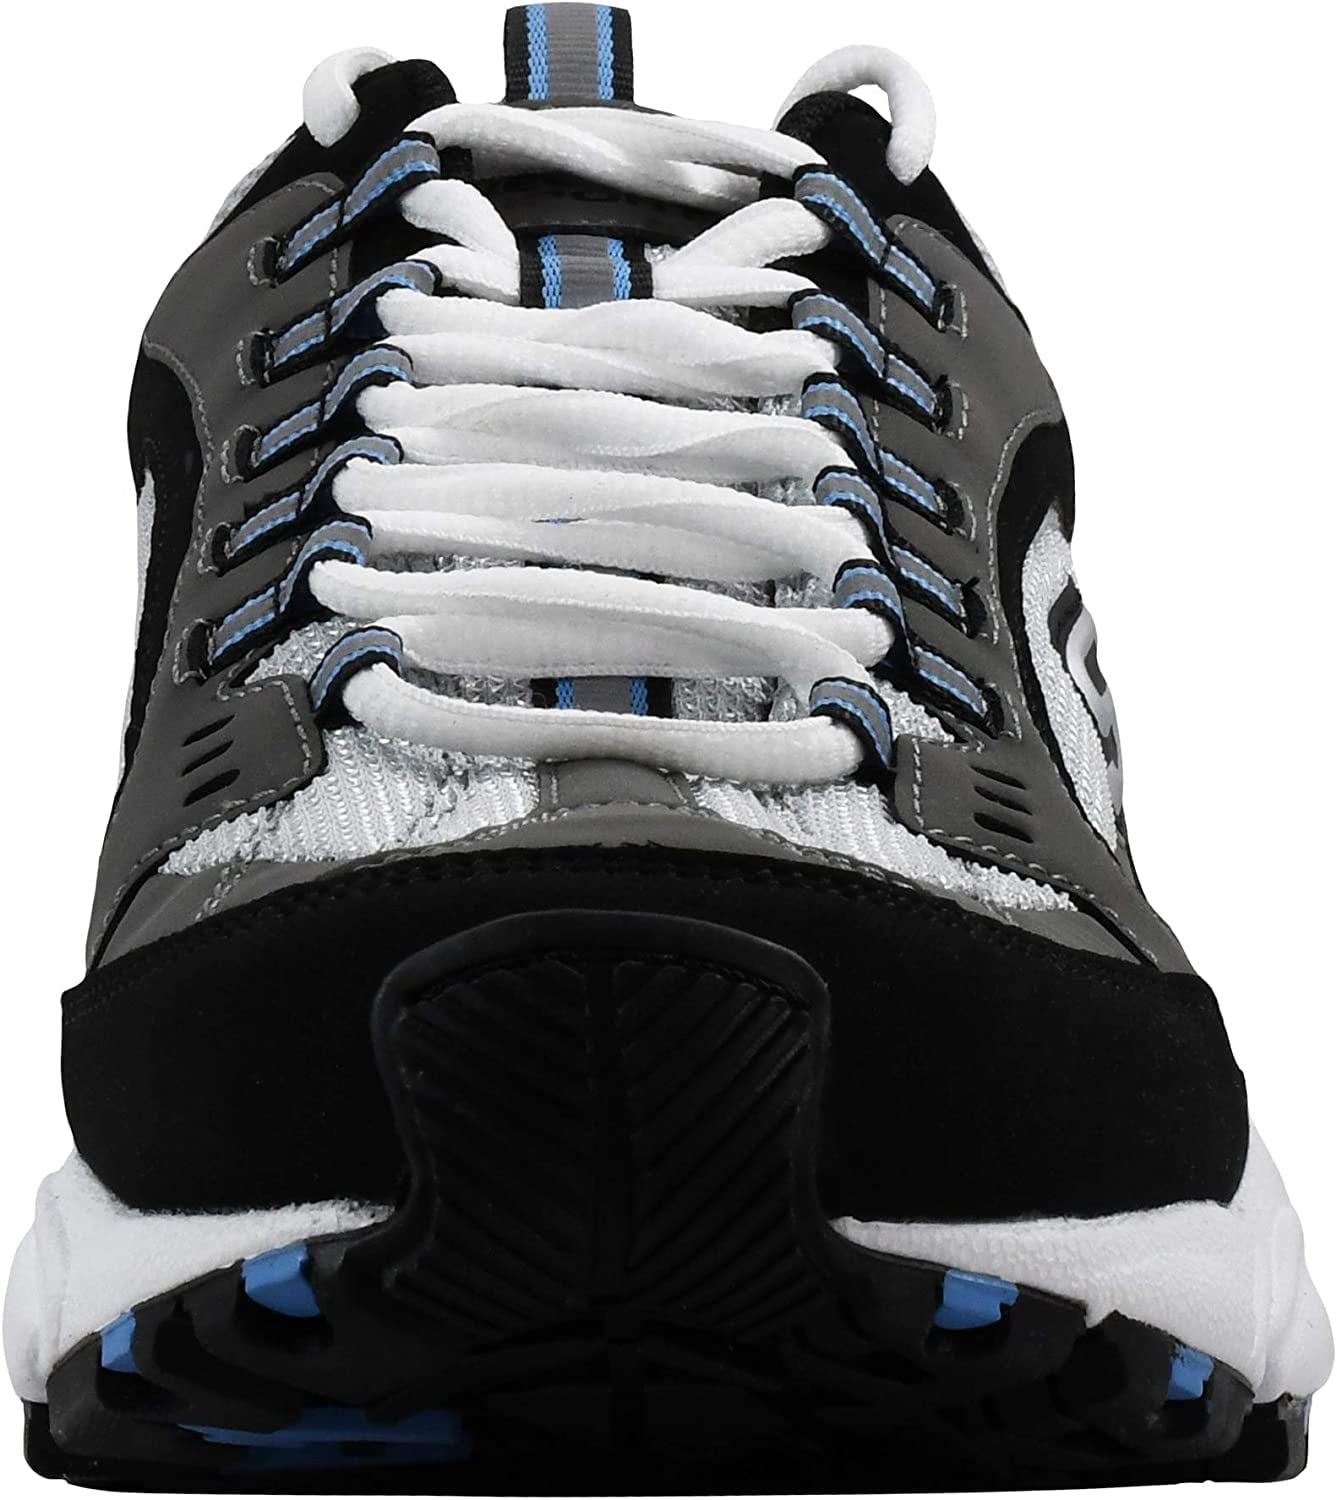 Skechers Sport Stamina Nuovo Charcoal/Grey Lace Up Sneaker 10 M US - Walmart.com